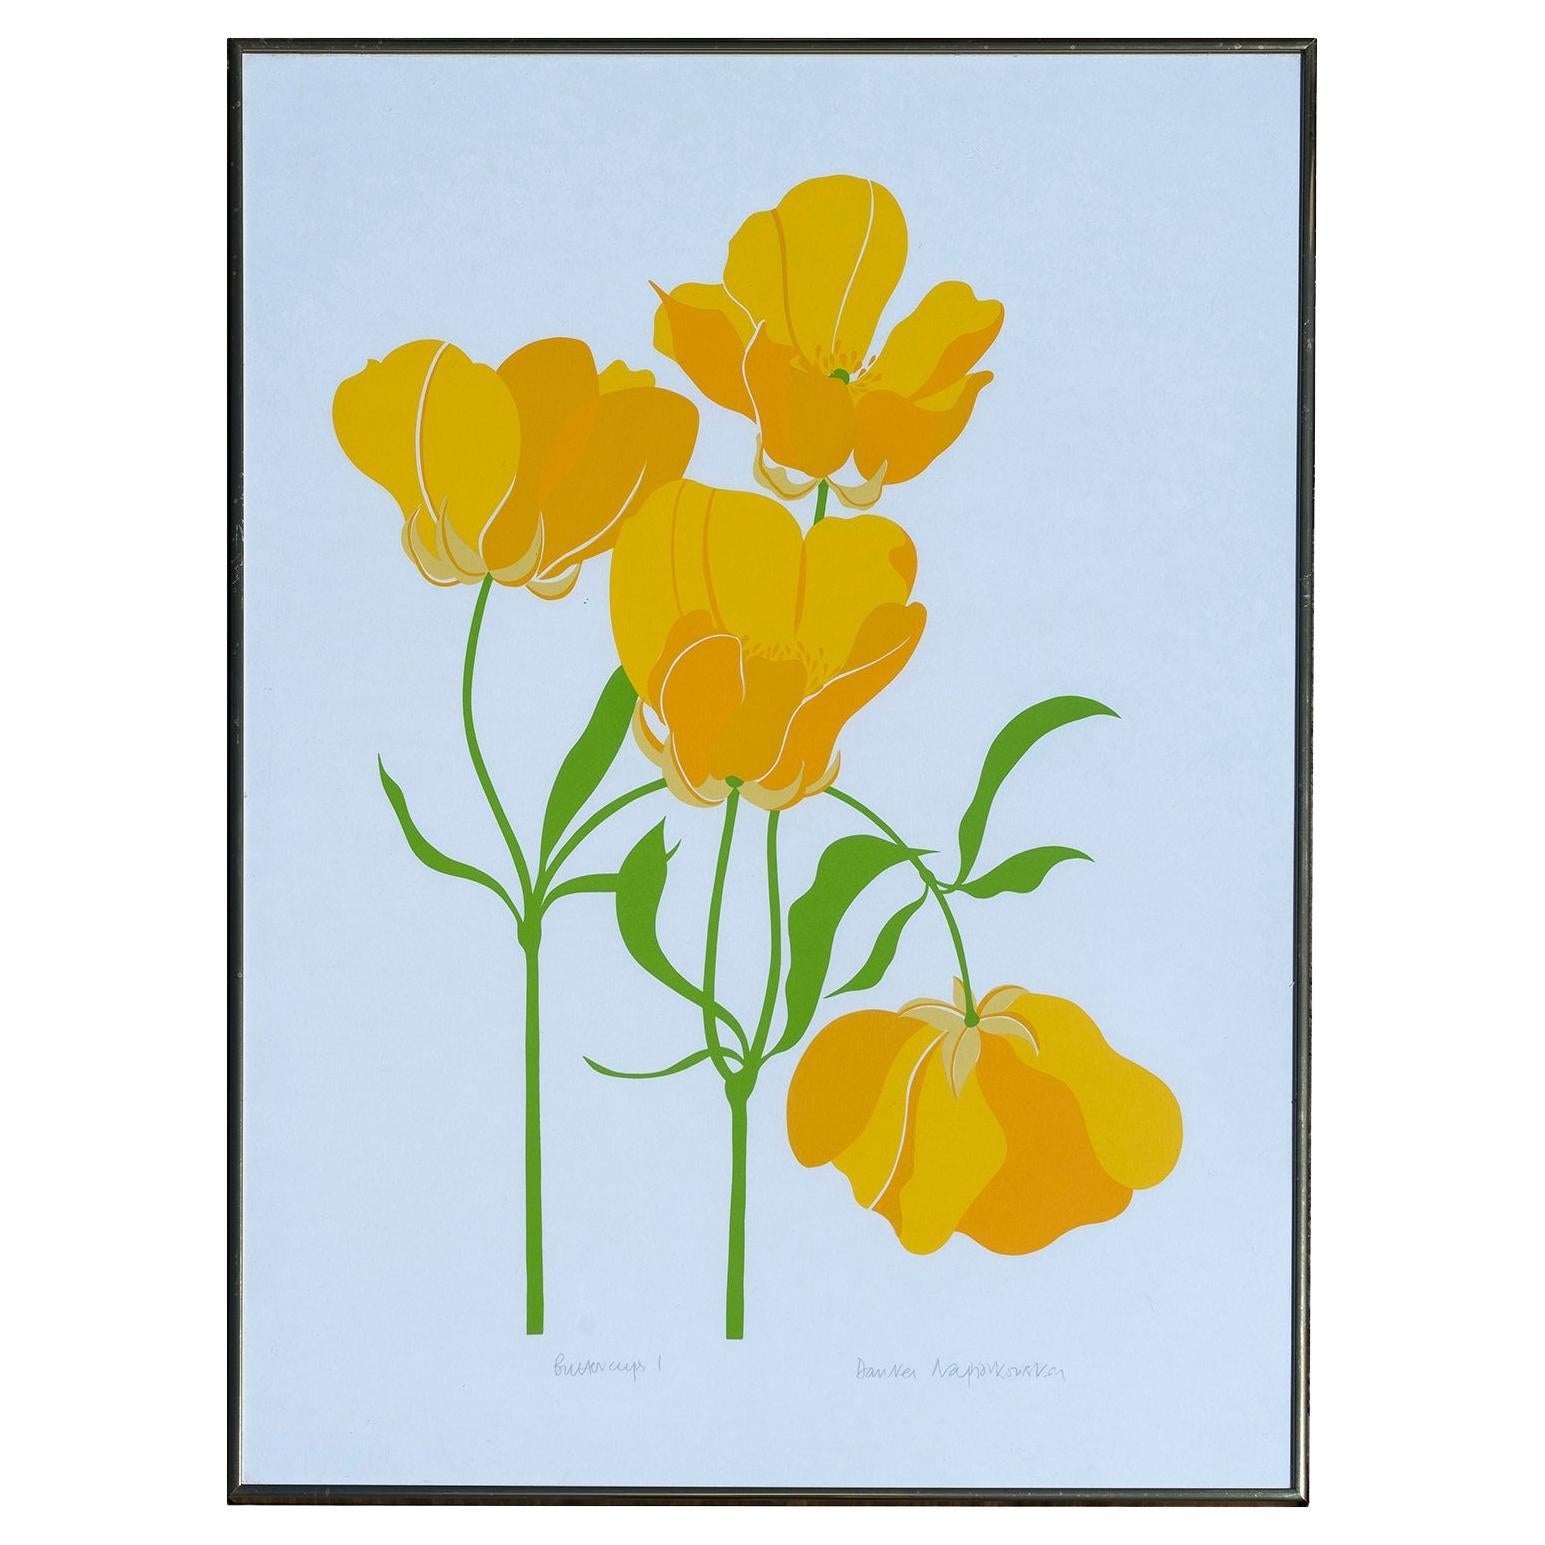 Danker Napiorkowska (B.1940's) British, polish heritage
Buttercups I
Poppies I
Titled & signed in pencil
Measures: Height 77cm 30 1/4